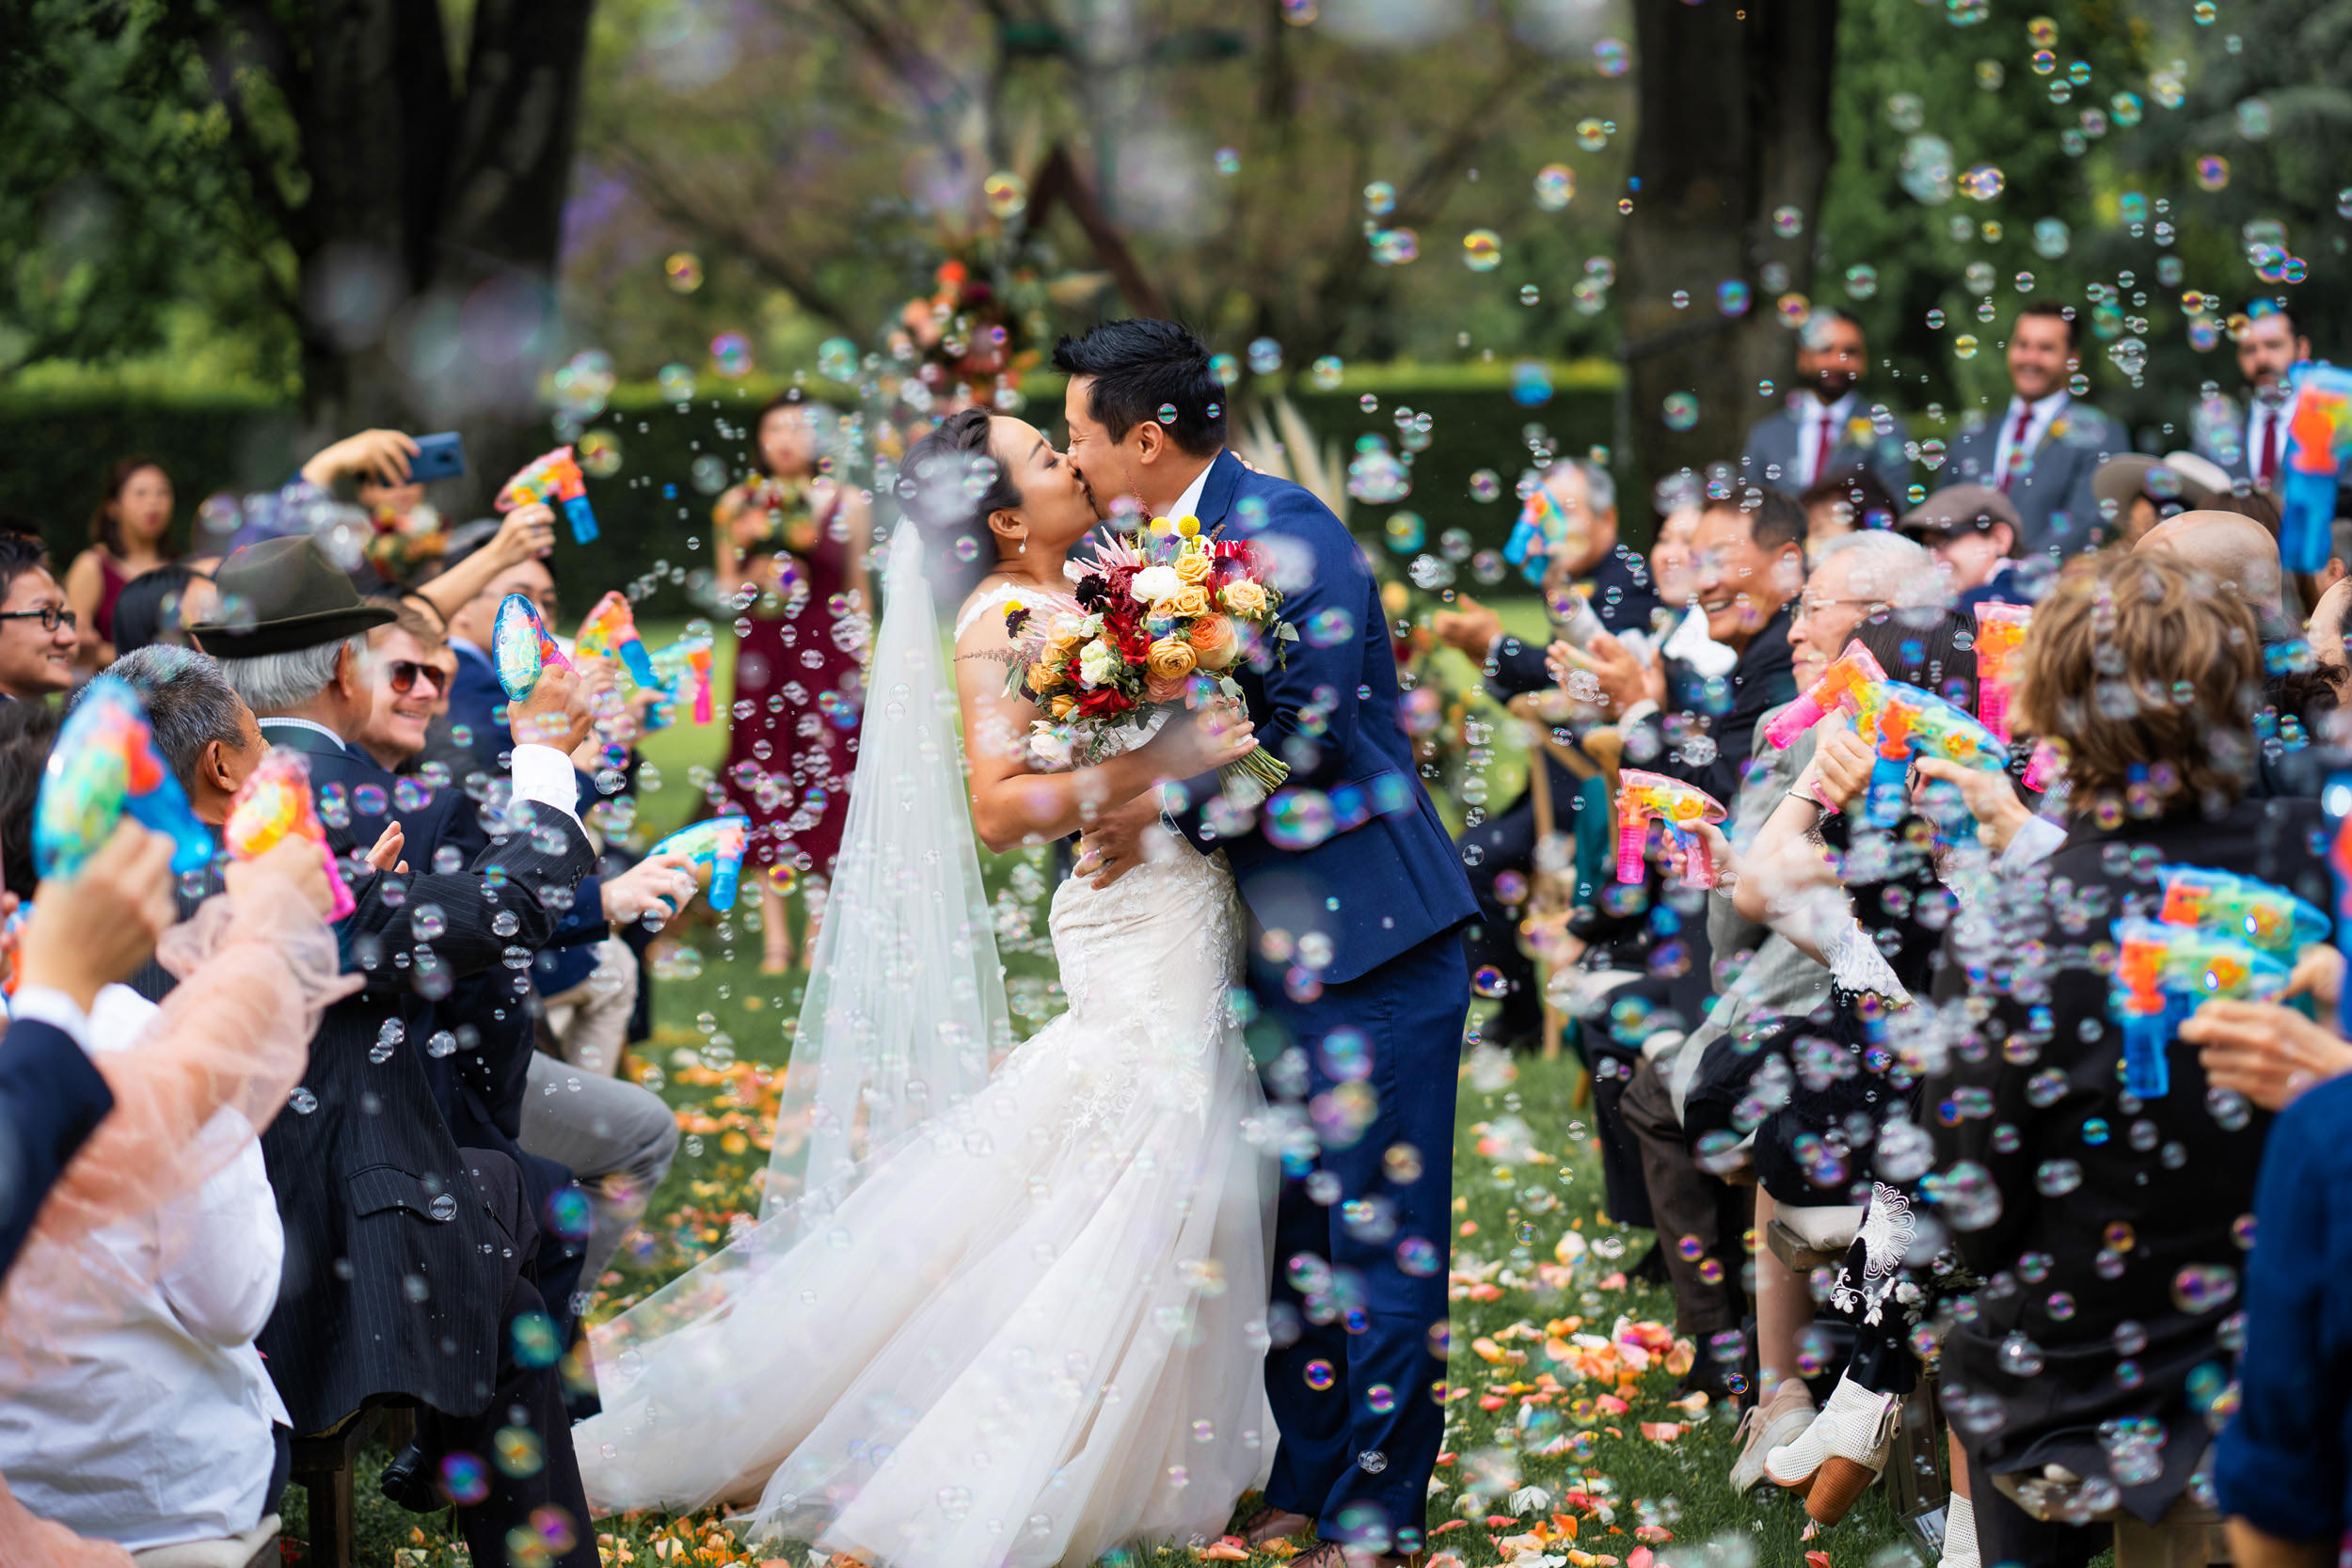 Bride and groom kissing with guests showering them with bubbles after their garden ceremony.